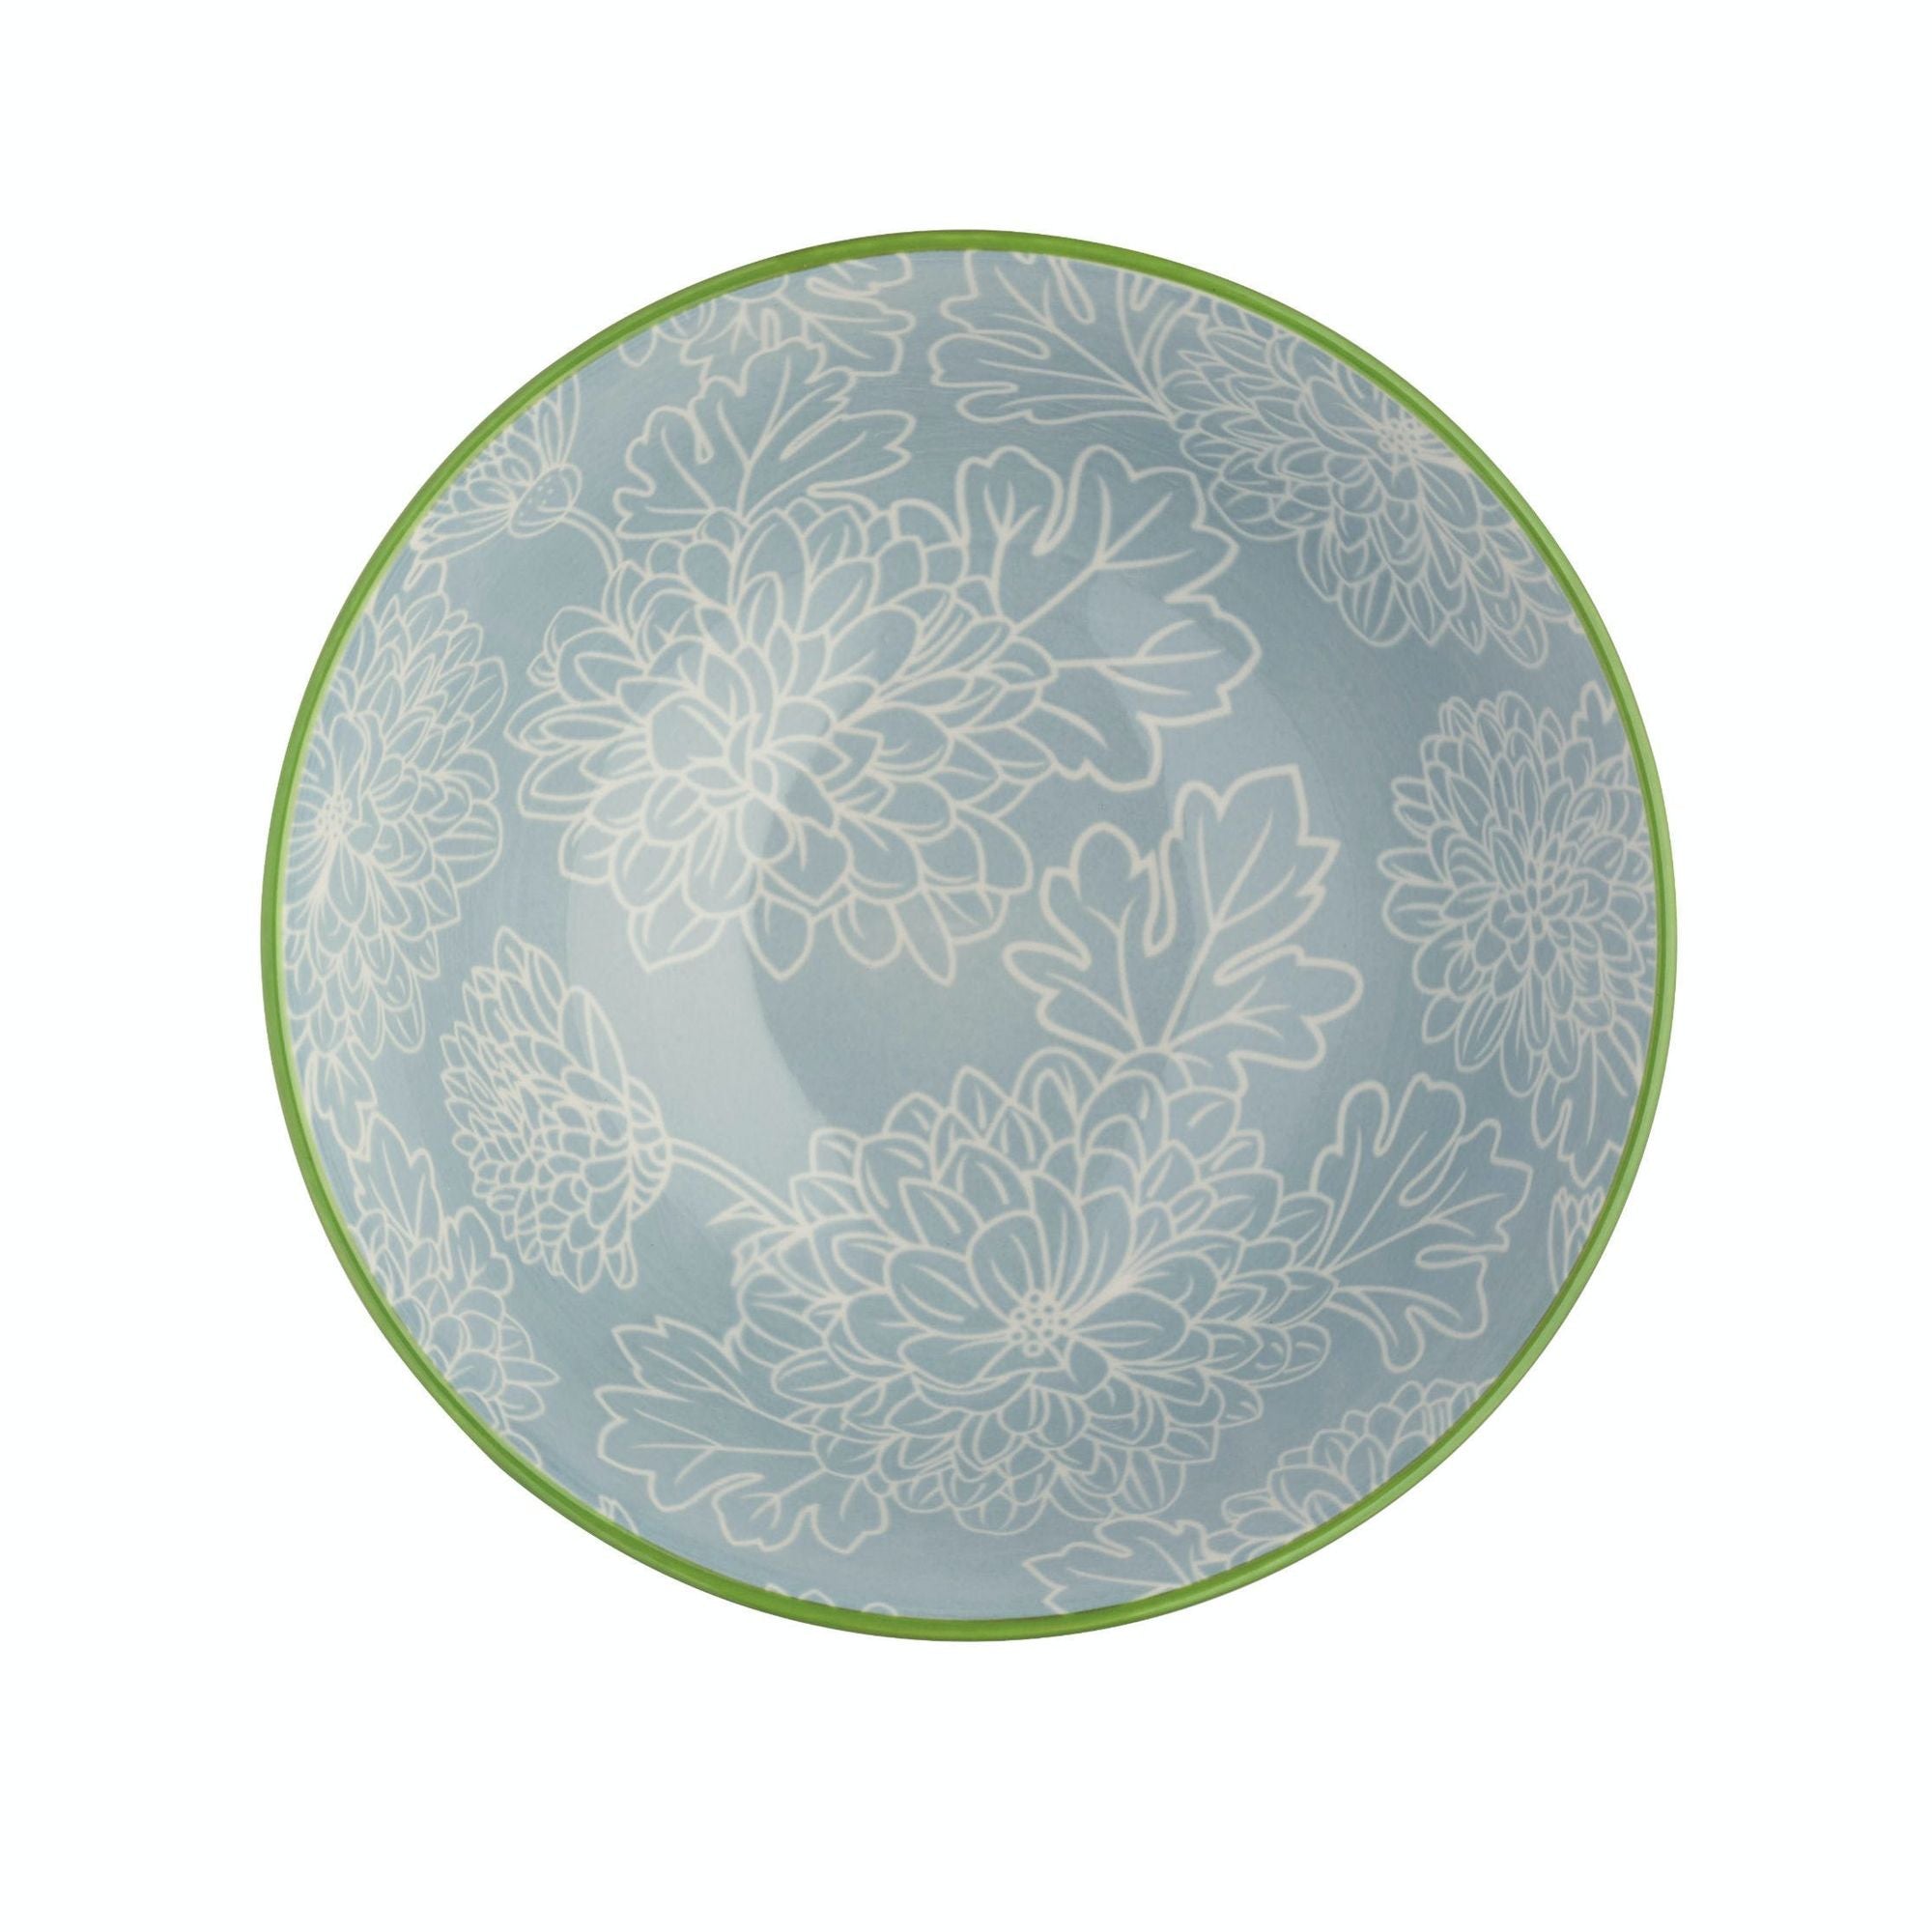 Mikasa Does It All Bowl - Grey Floral 15.7cm